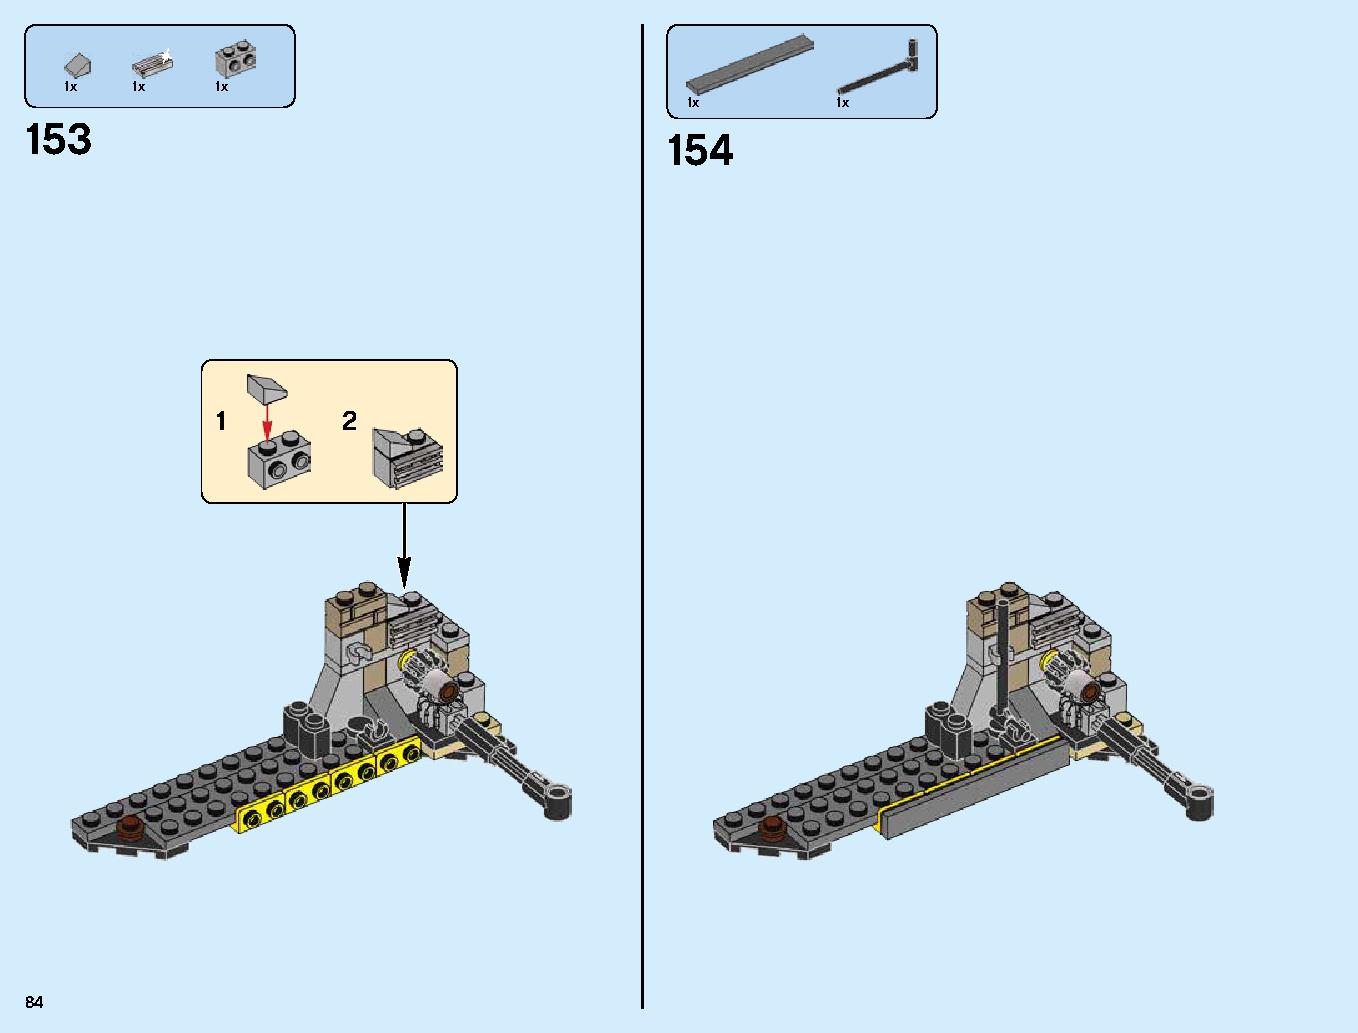 S.O.G. Headquarters 70640 LEGO information LEGO instructions 84 page